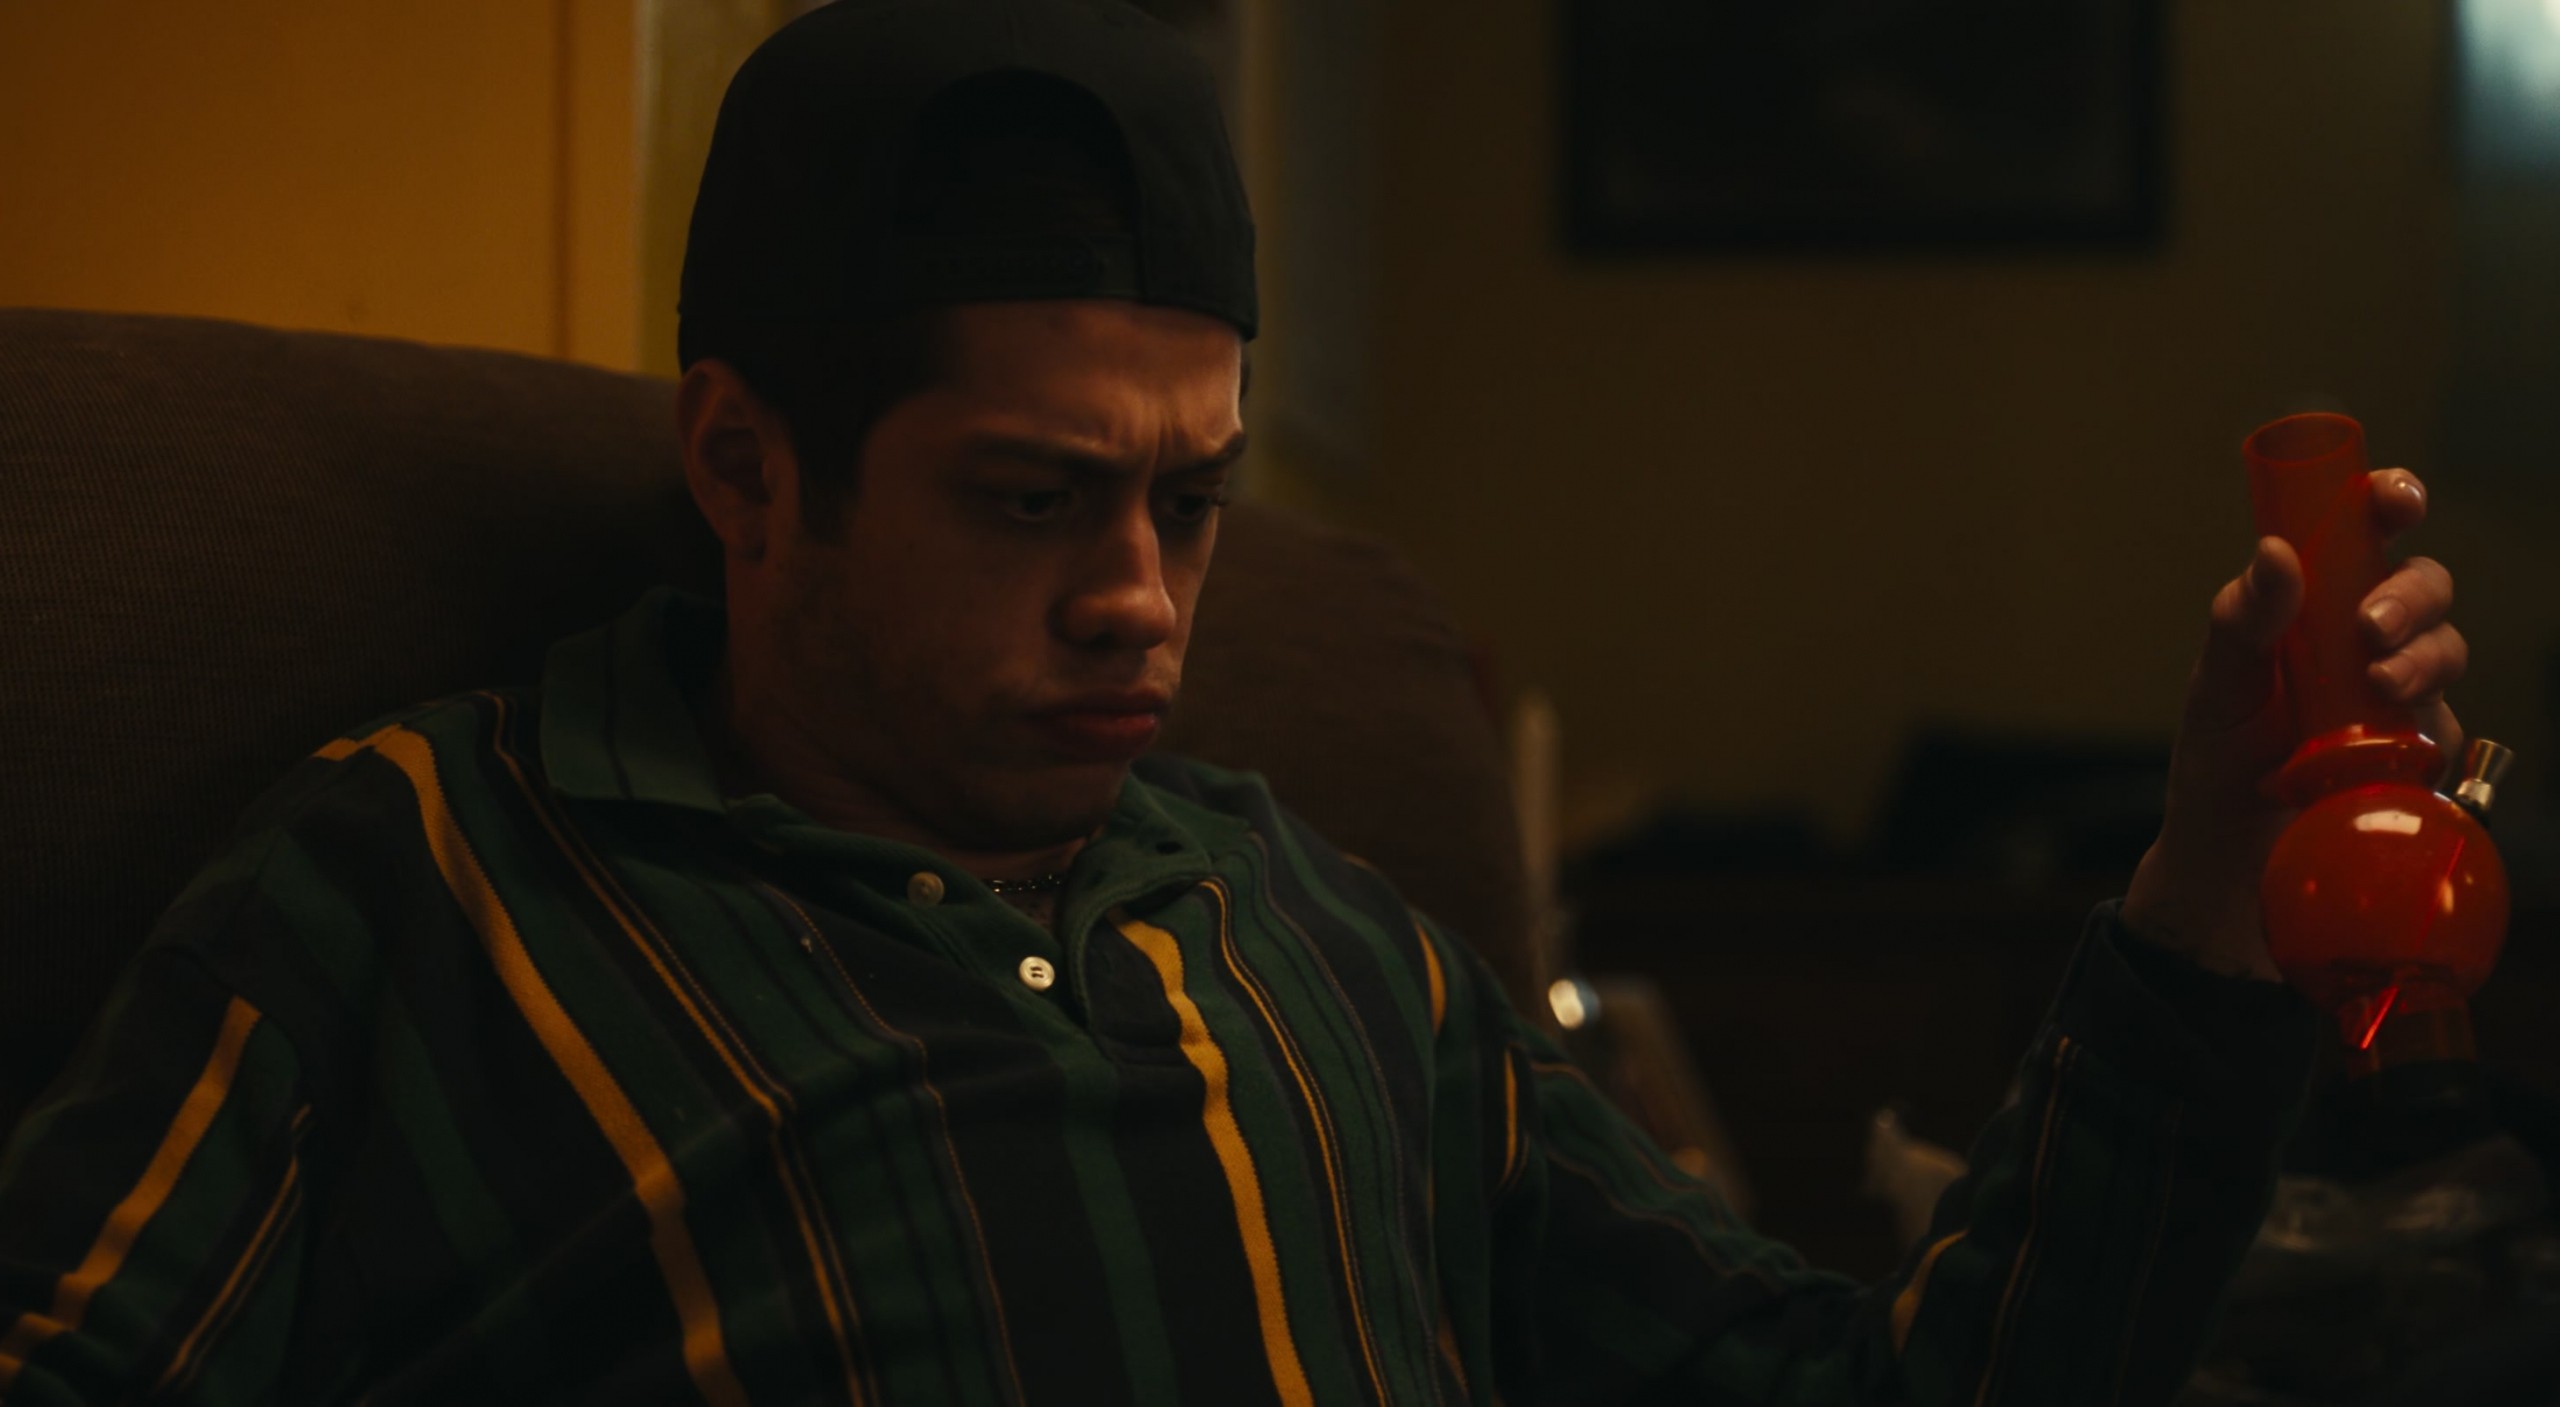 Worn on Dumb Money (2023) Movie - Long-Sleeve Shirt in Green with Yellow and Navy Stripes Worn by Pete Davidson as Kevin Gill